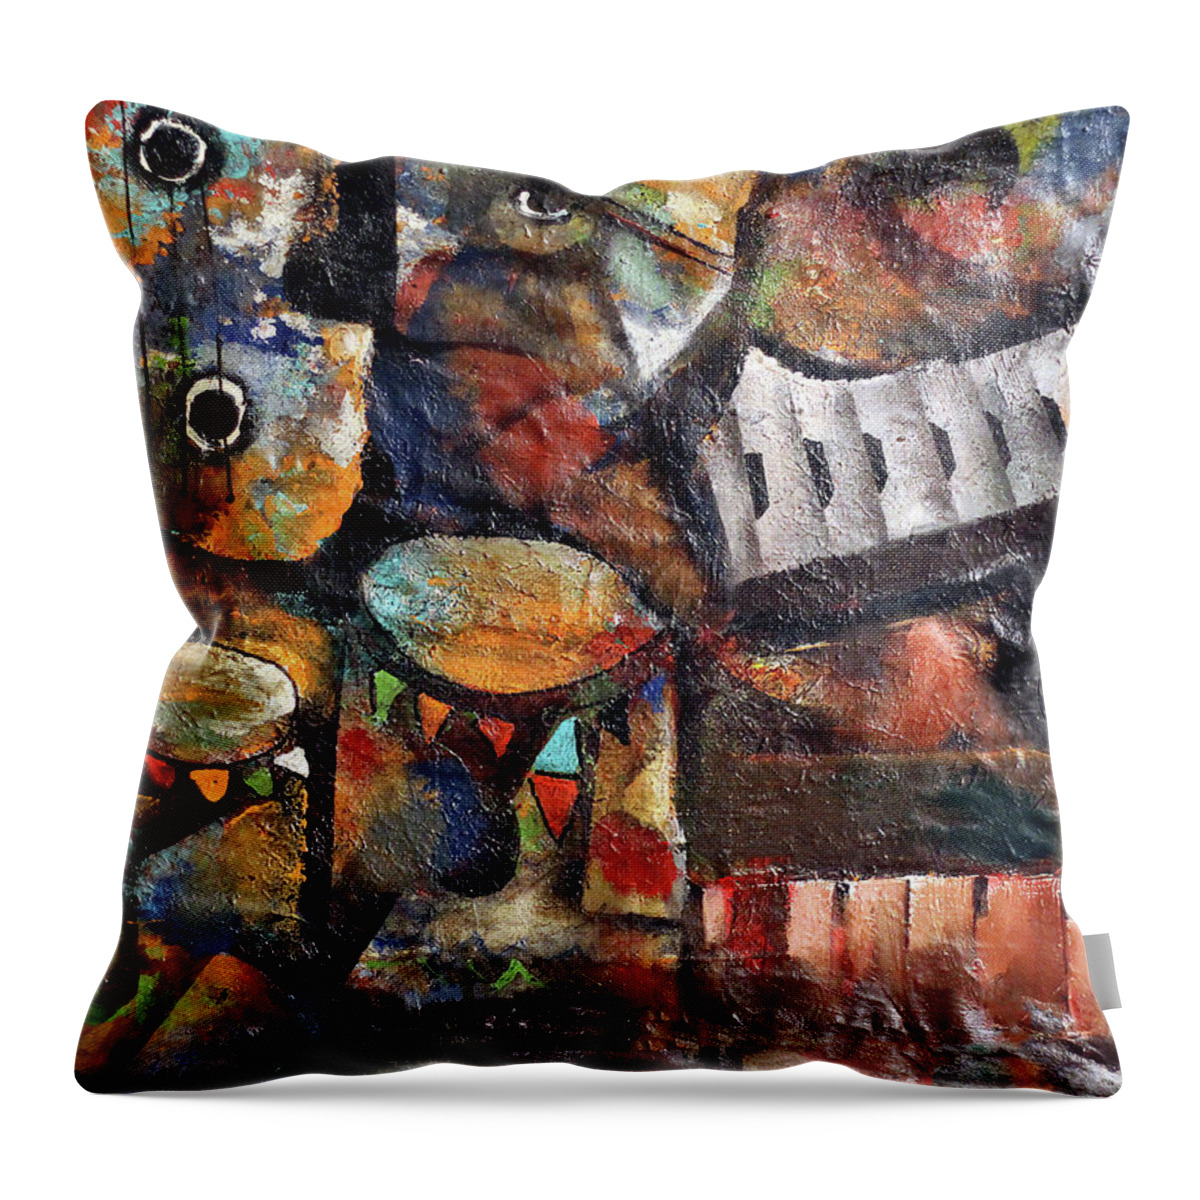 African Art Throw Pillow featuring the painting Between The Keys by Peter Sibeko 1940-2013